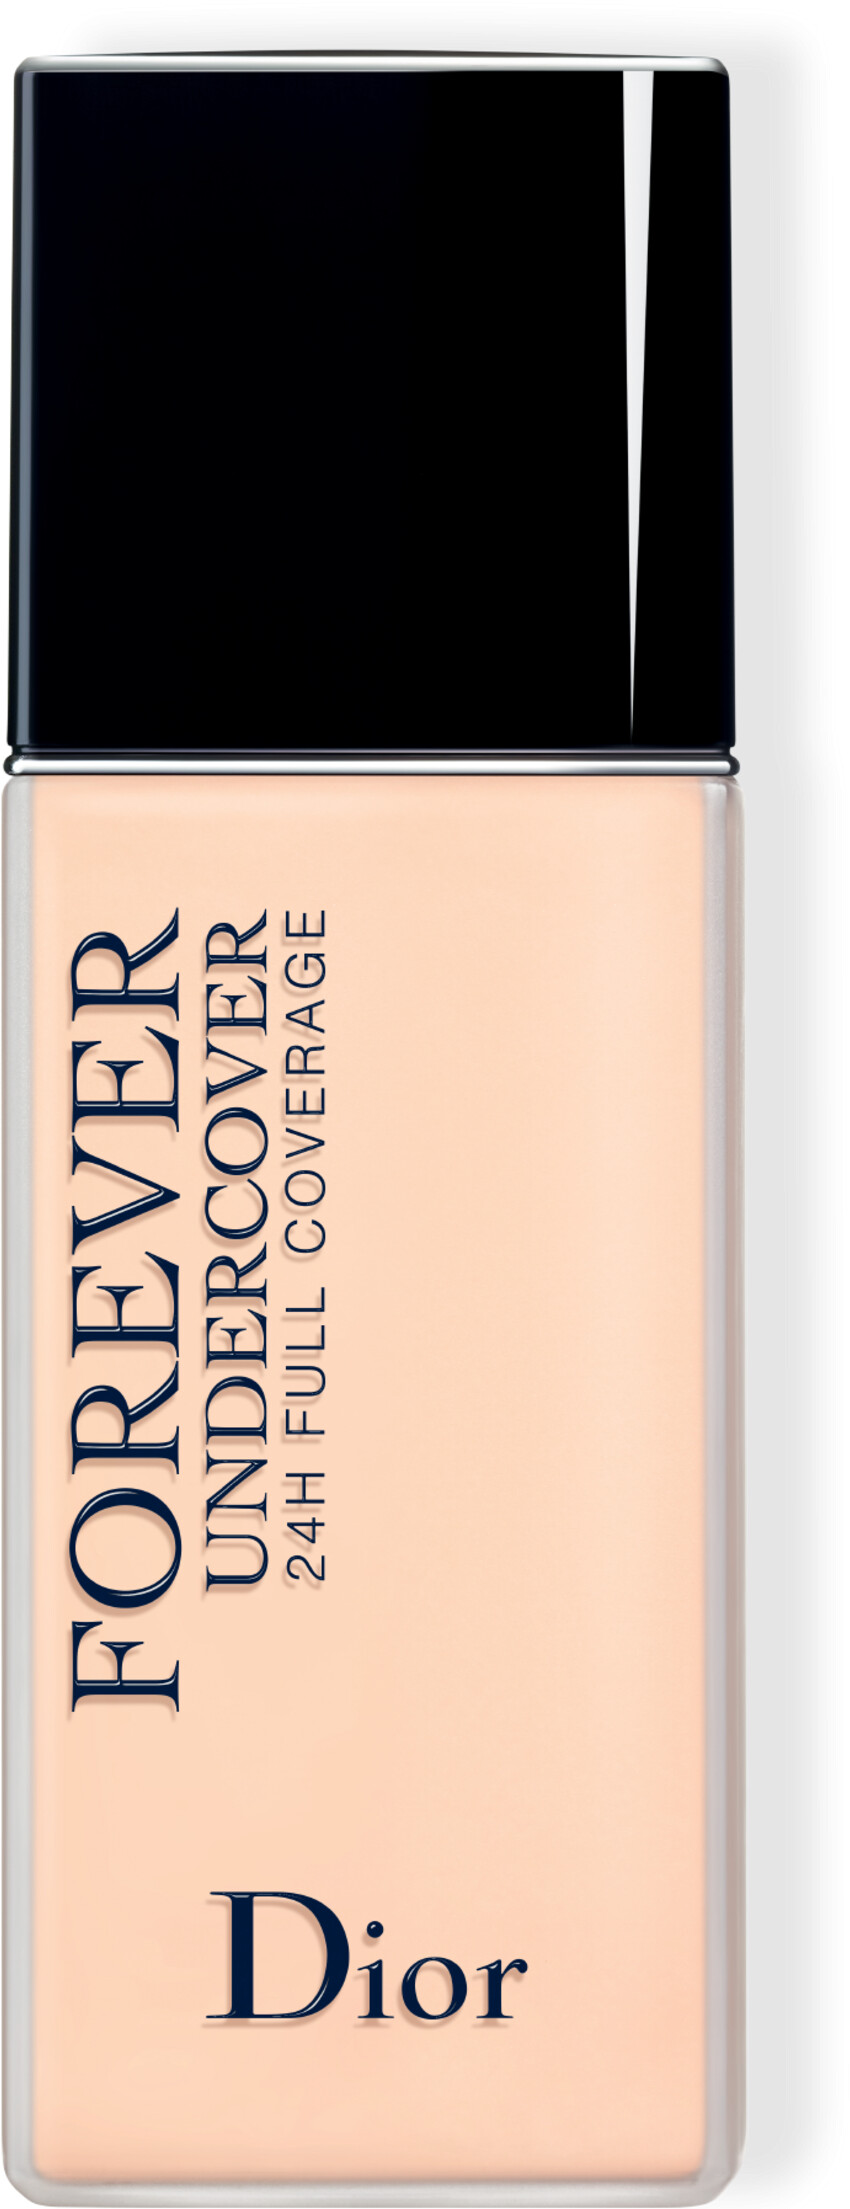 DIOR Diorskin Forever Undercover Full Coverage Foundation 40ml 010 - Ivory